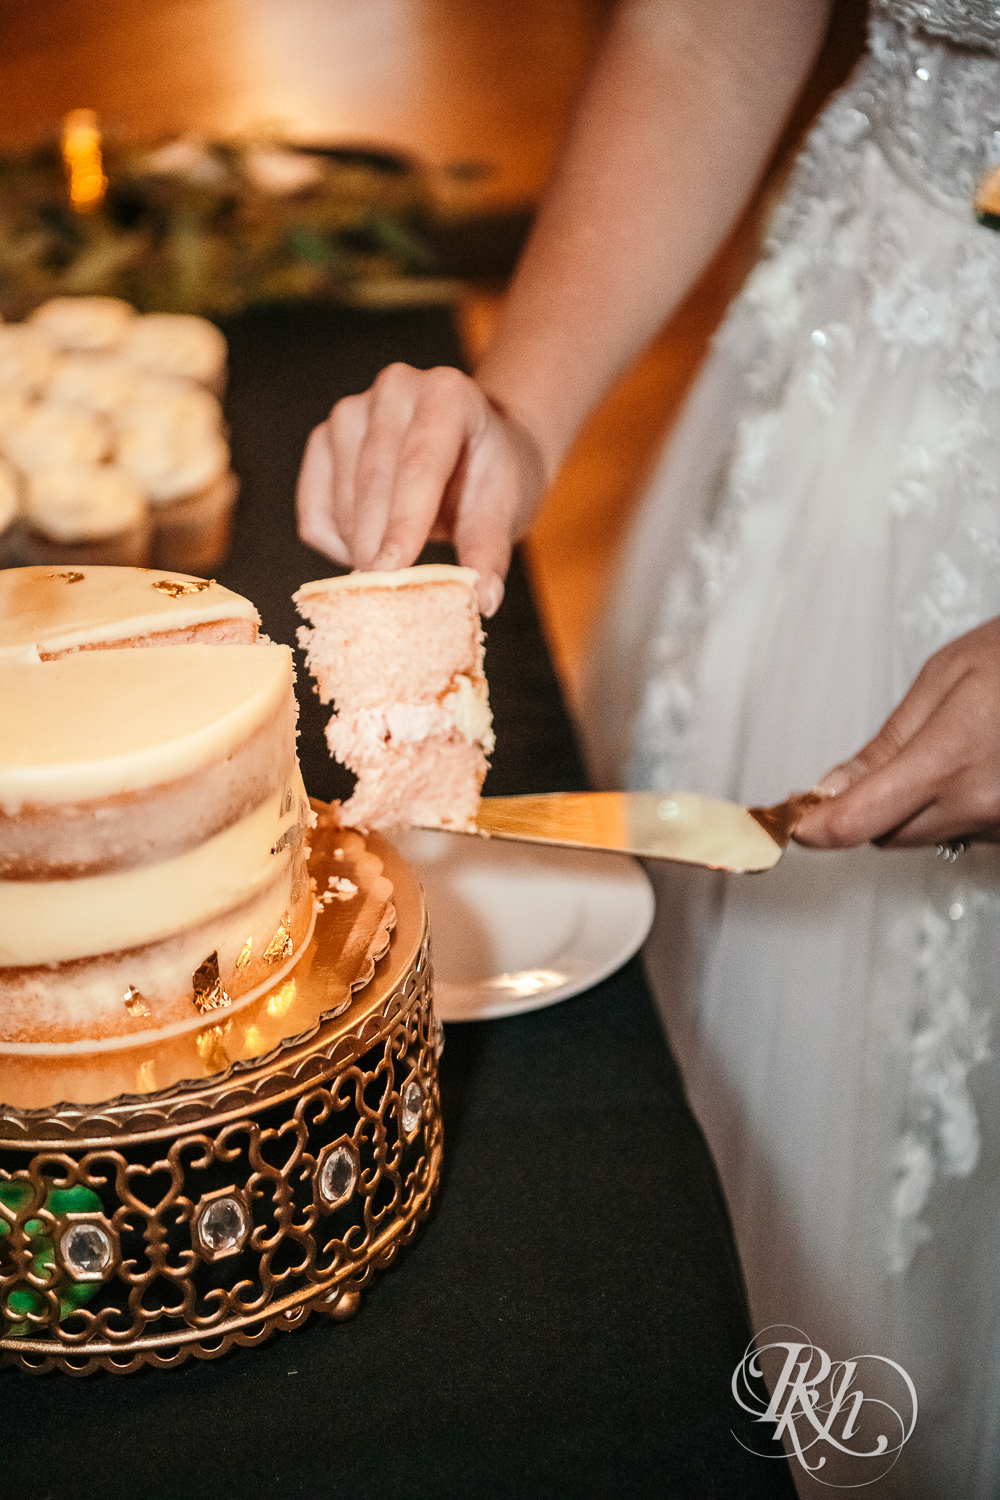 Bride and groom cut wedding cake at Green Acres Event Center in Eden Prairie, Minnesota.